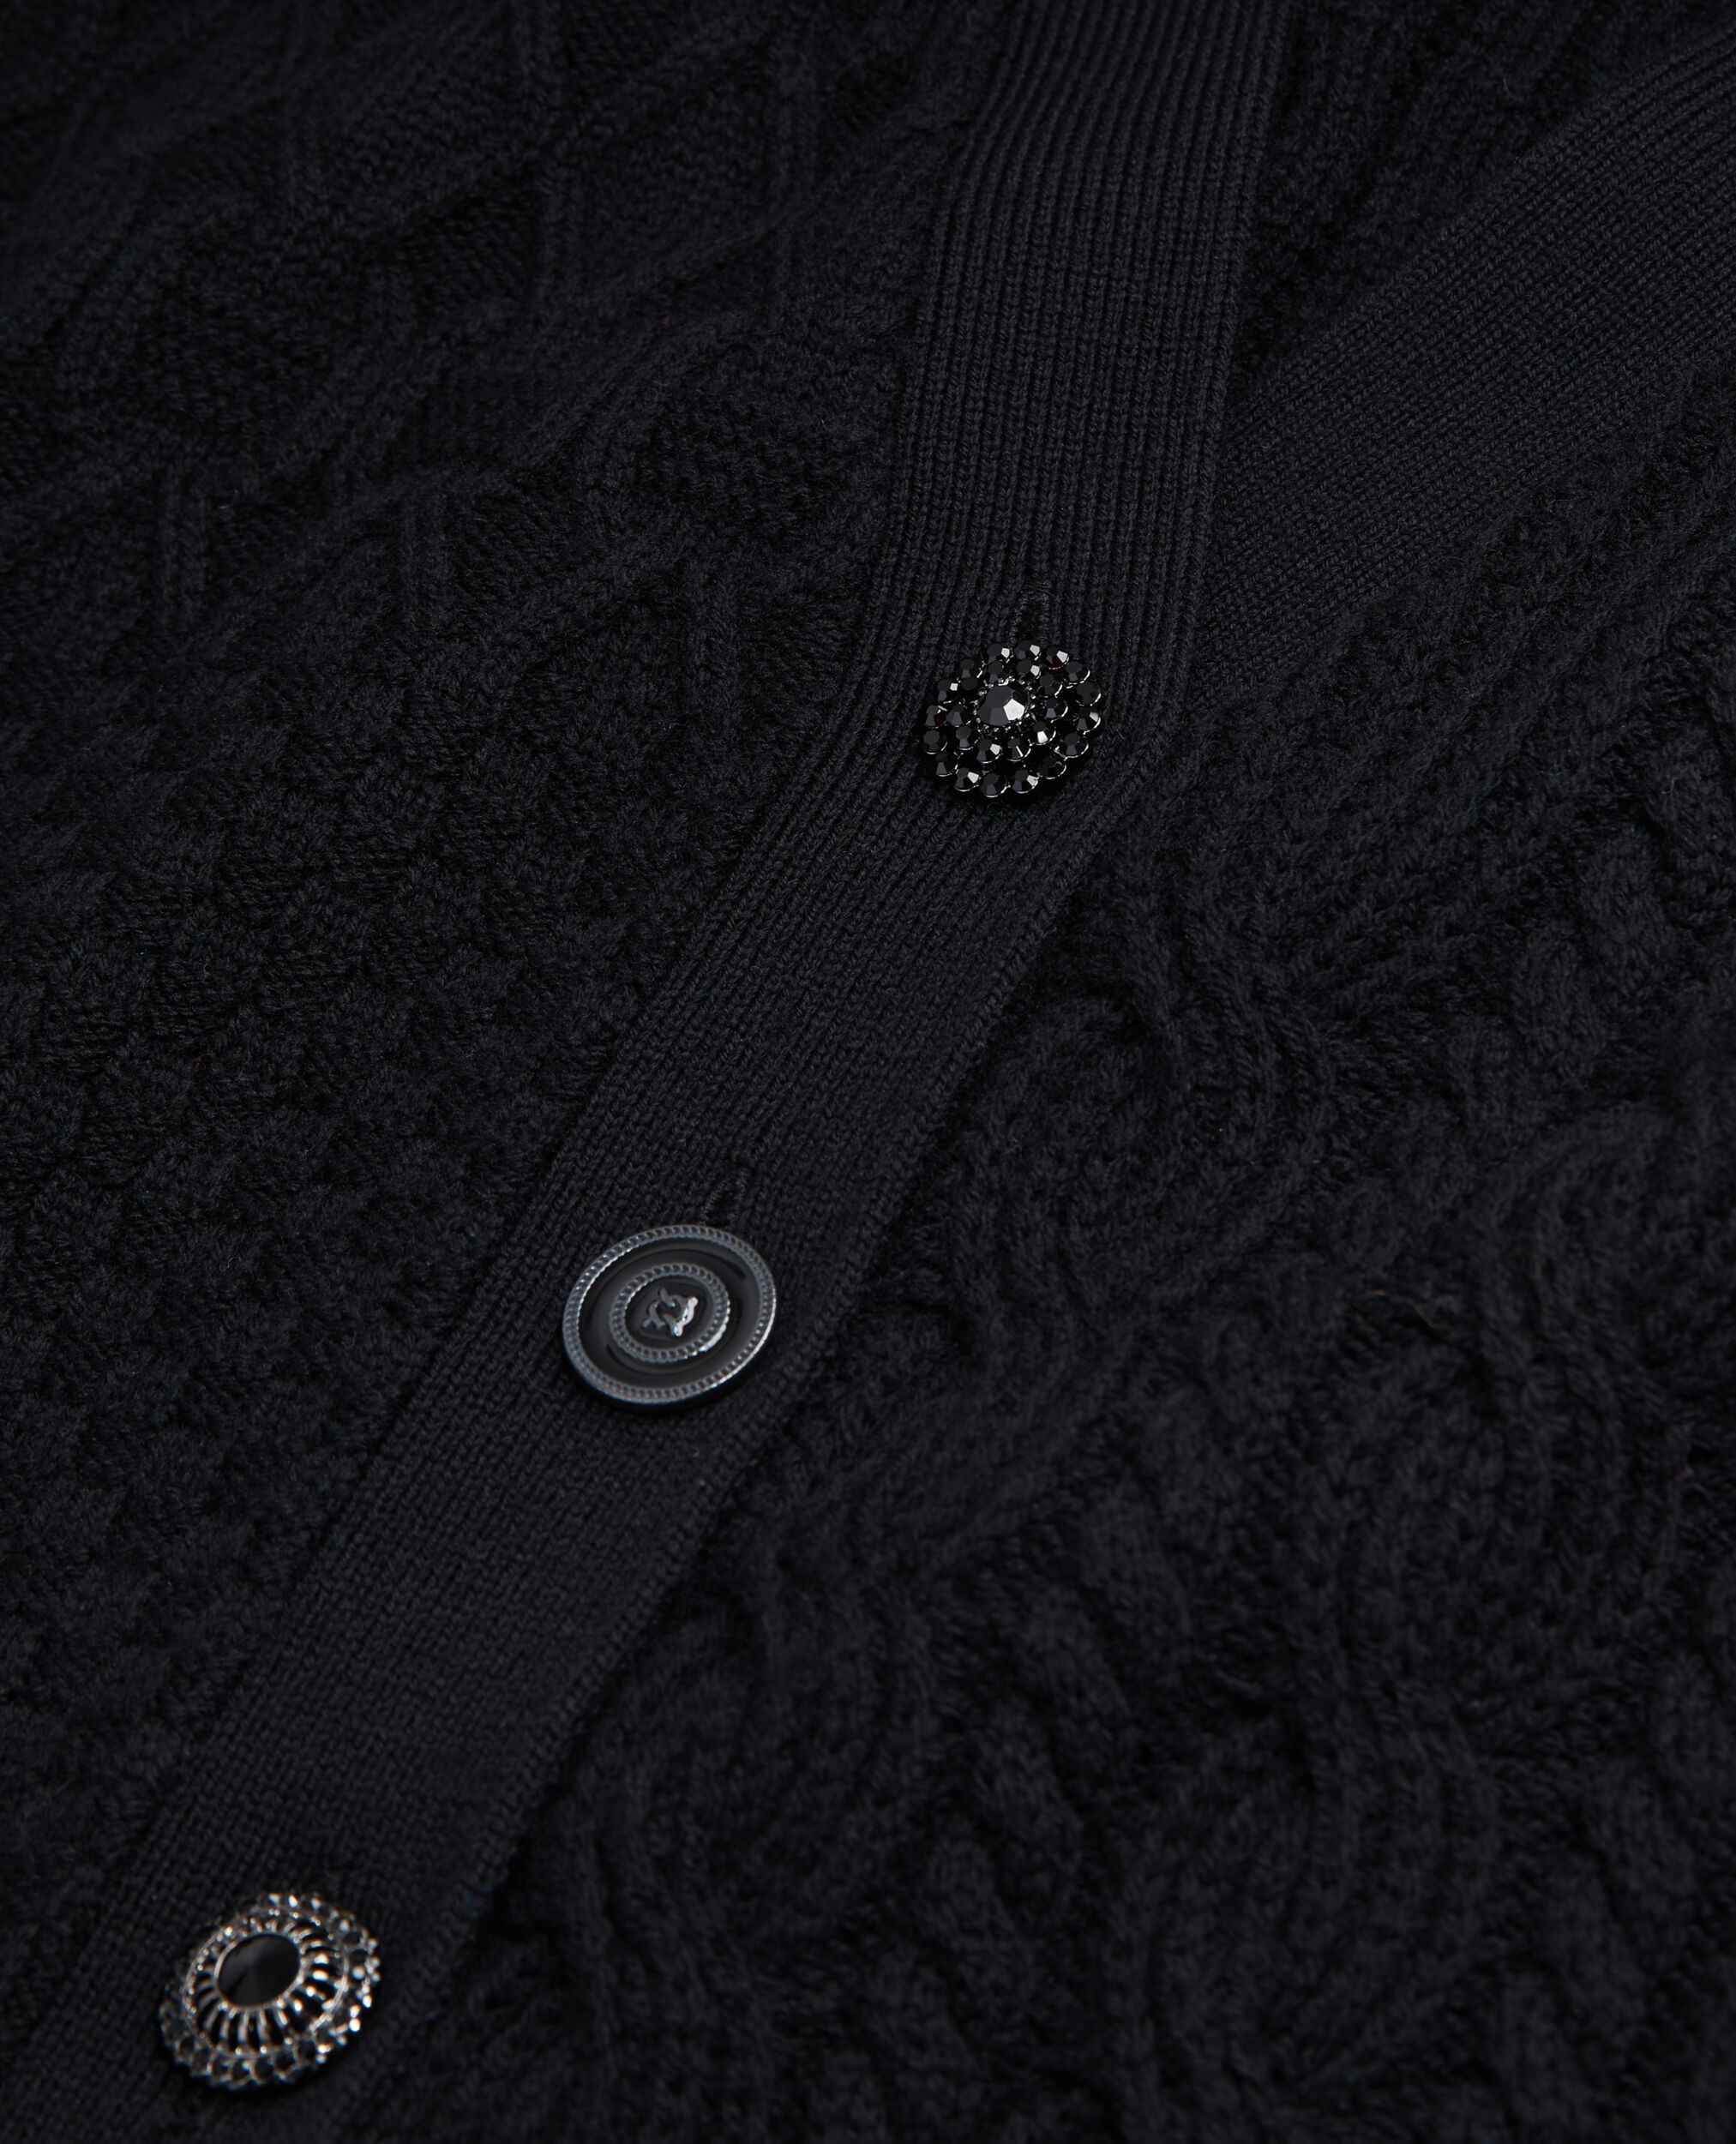 Black cable knit wool cardigan, BLACK, hi-res image number null